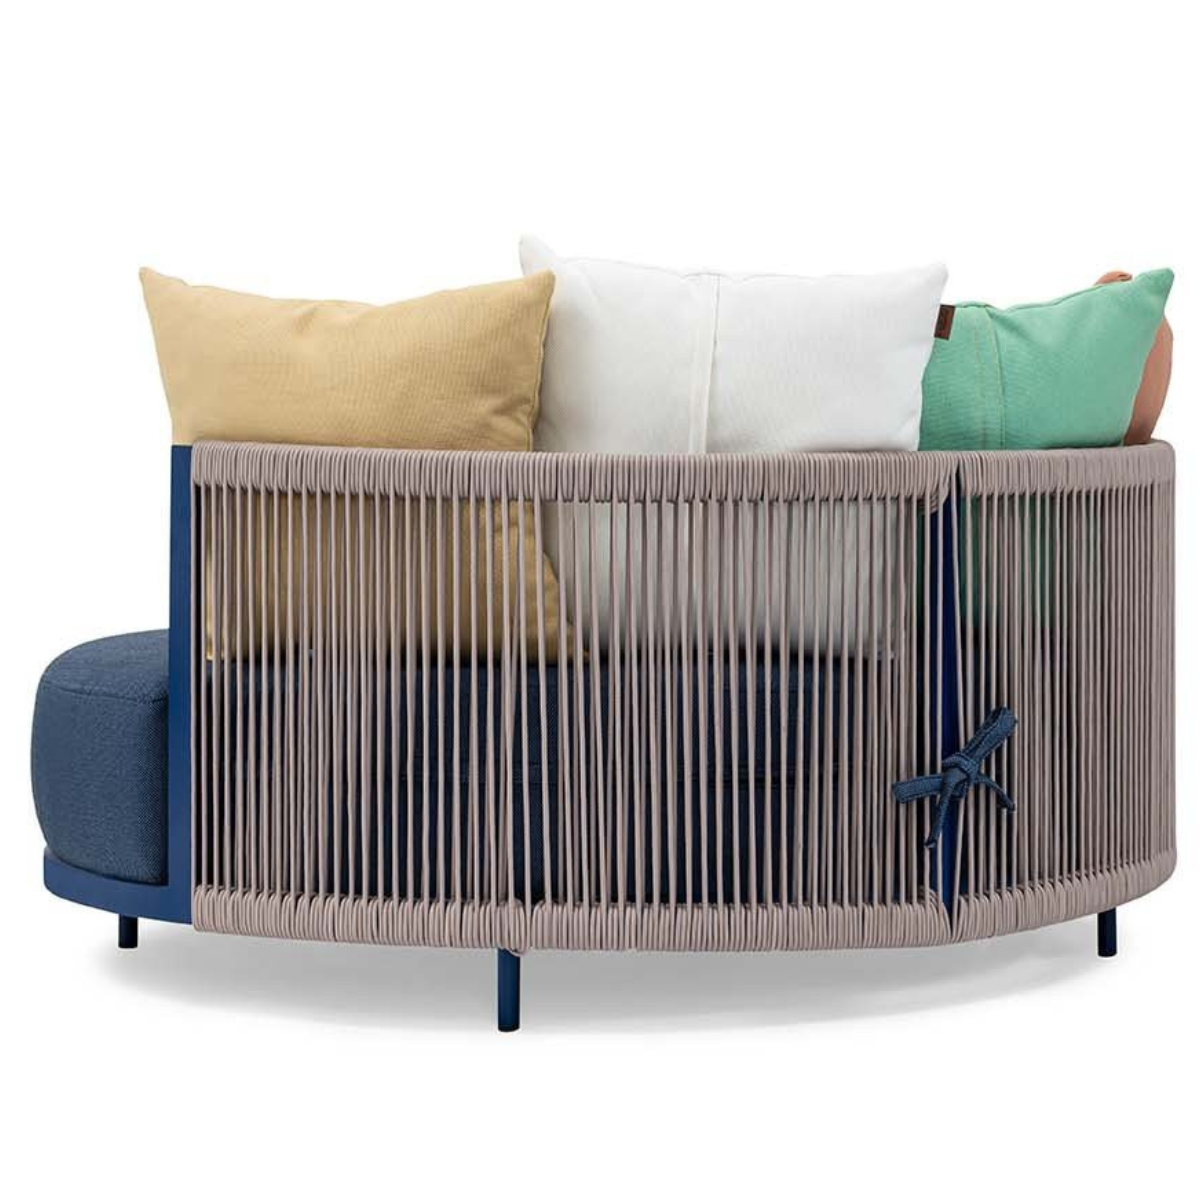 Lovebed Lounge Chair